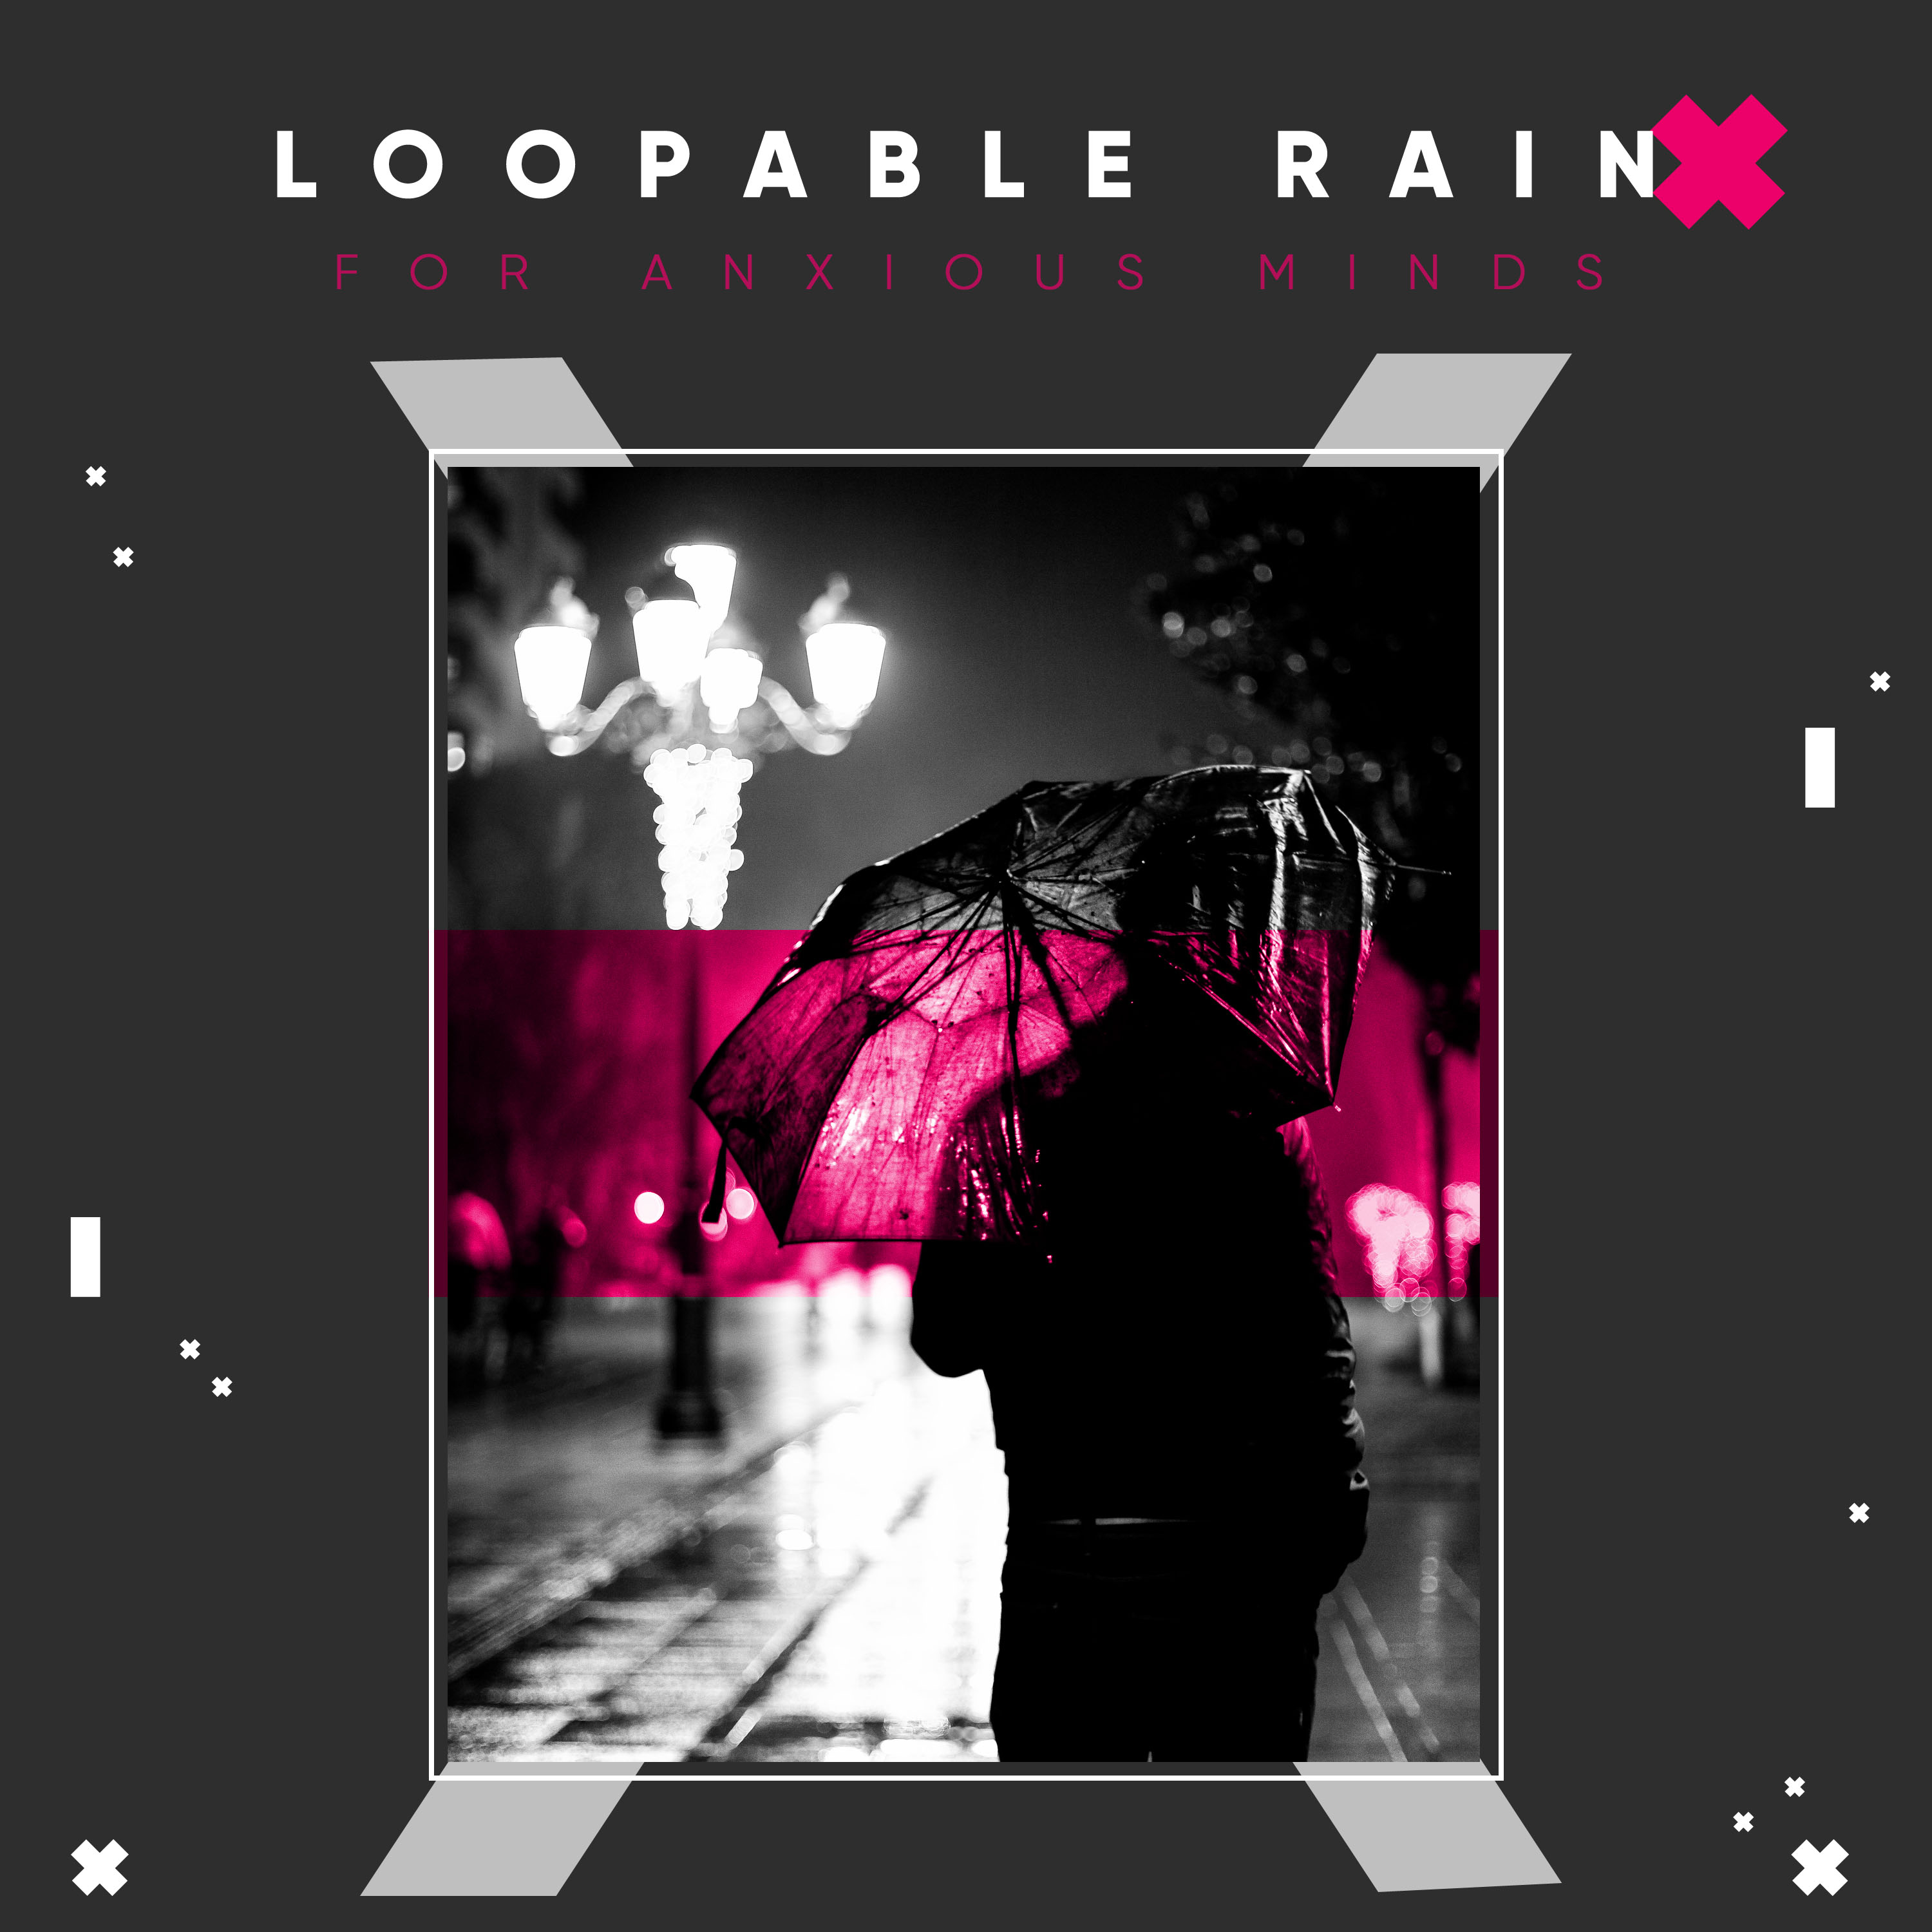 16 Loopable Rain Noises for Anxious Minds